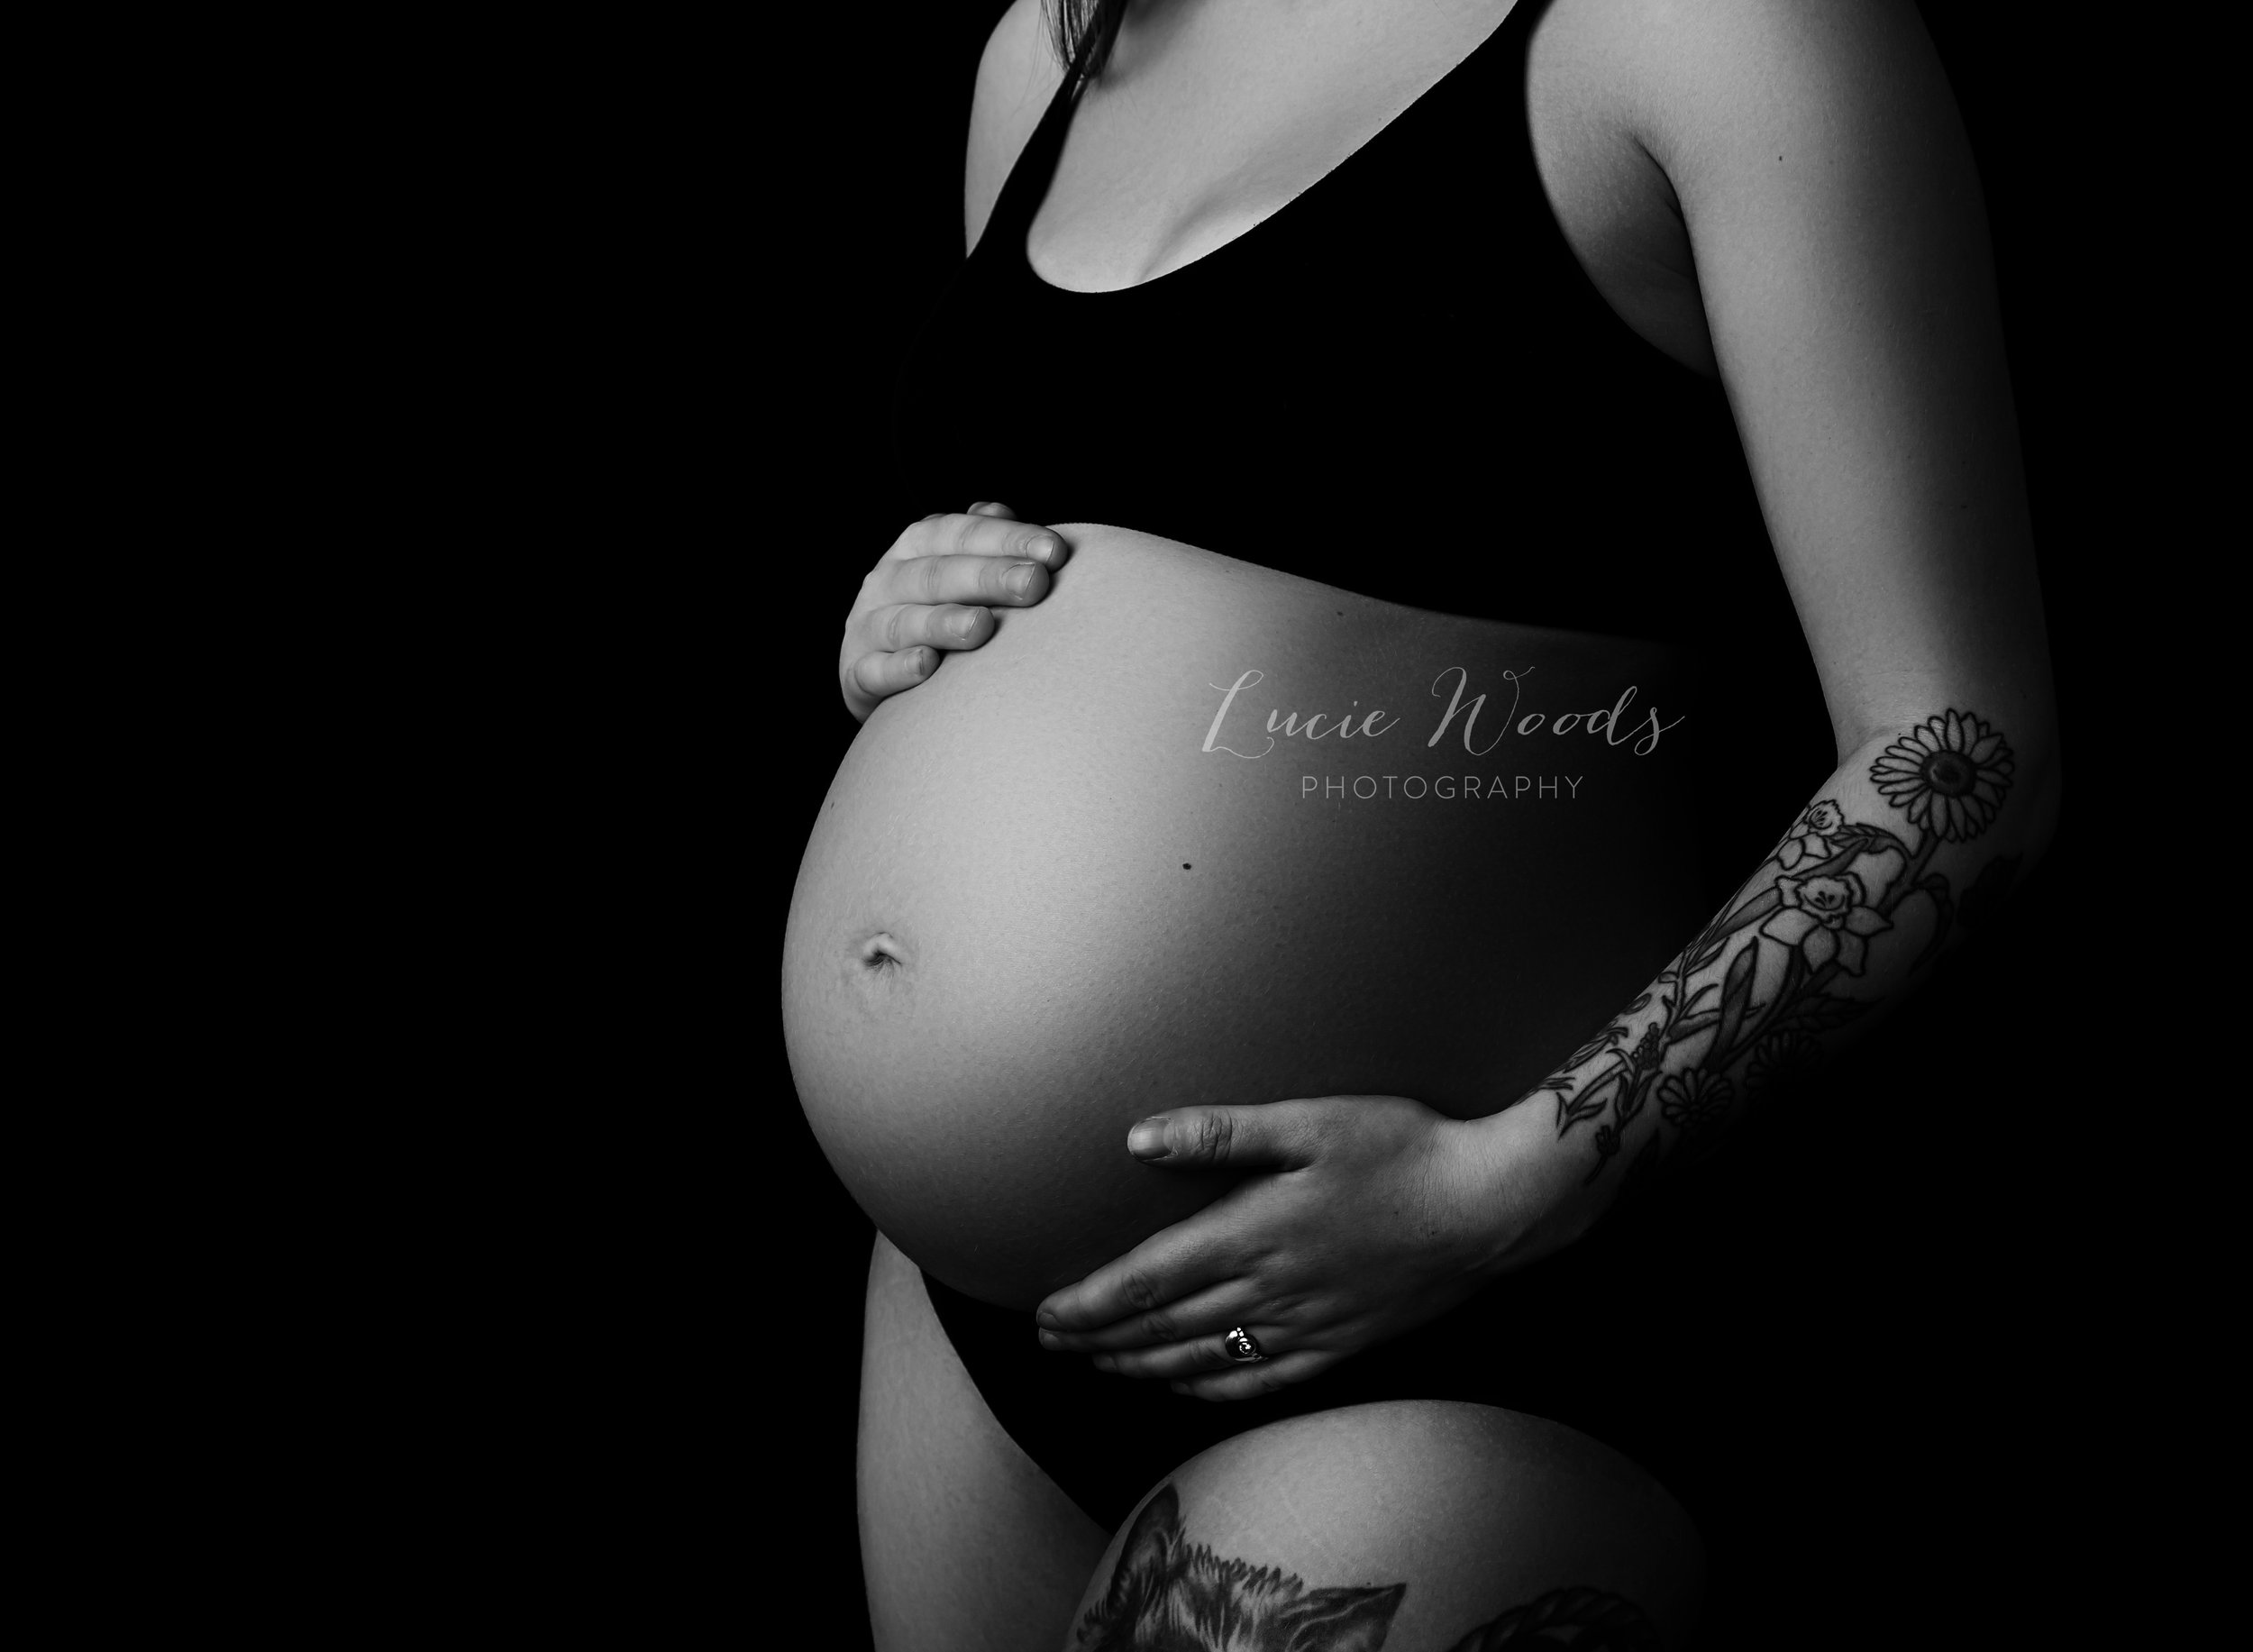 Bump to baby maternity photographer Manchester Newborn Photographer Baby photography baby photo Manchester Lancashire Lucie Woods Ramsbottom portraits